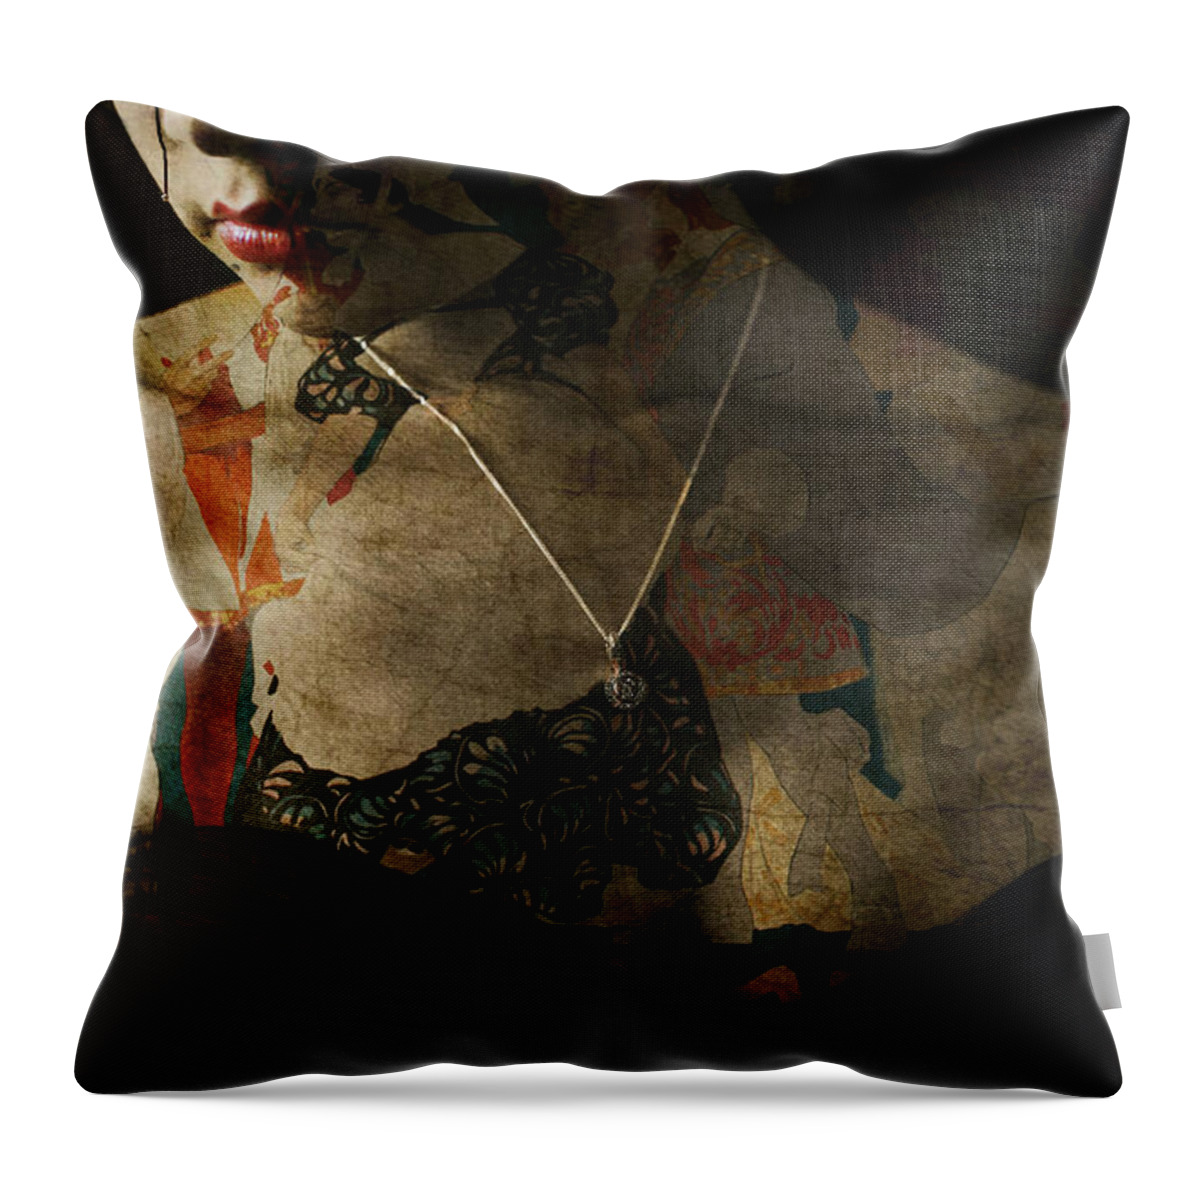 Woman Throw Pillow featuring the digital art Every Picture Tells A Story by Paul Lovering